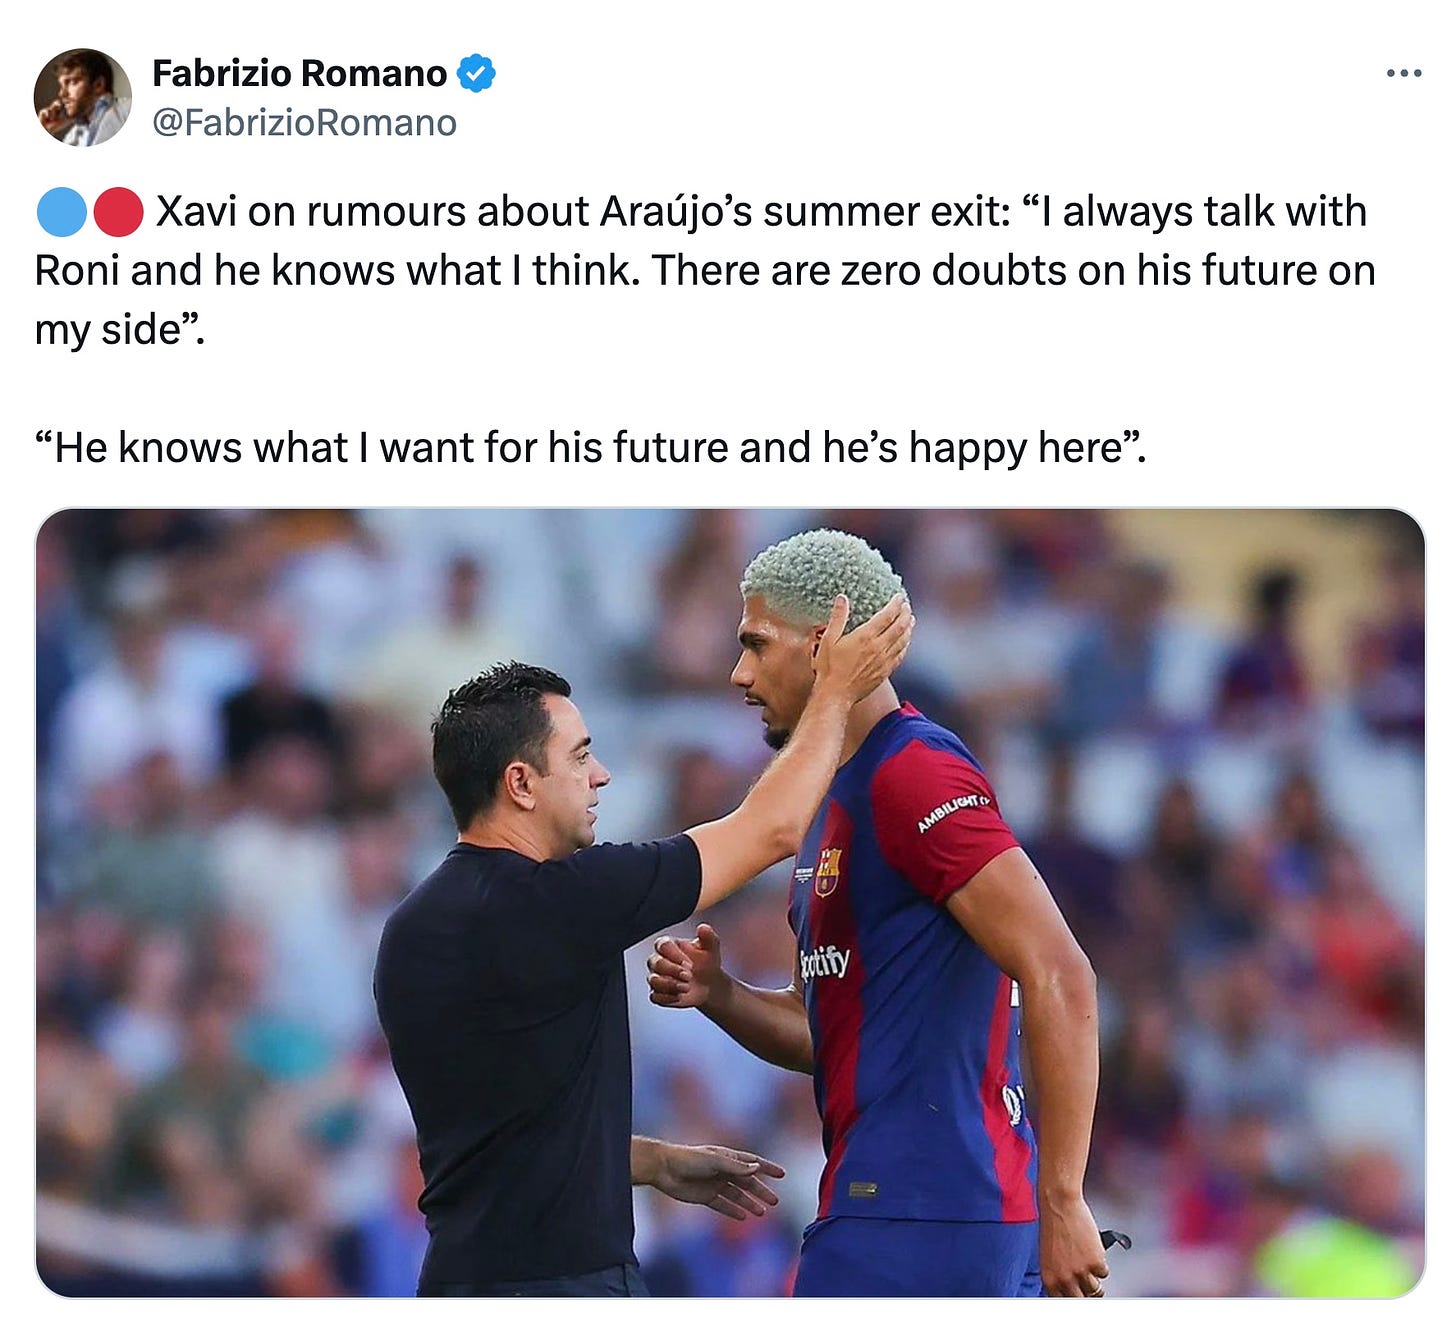 A tweet by Fabrizio Romano featuring quotes from Xavi on Ronald Araujo